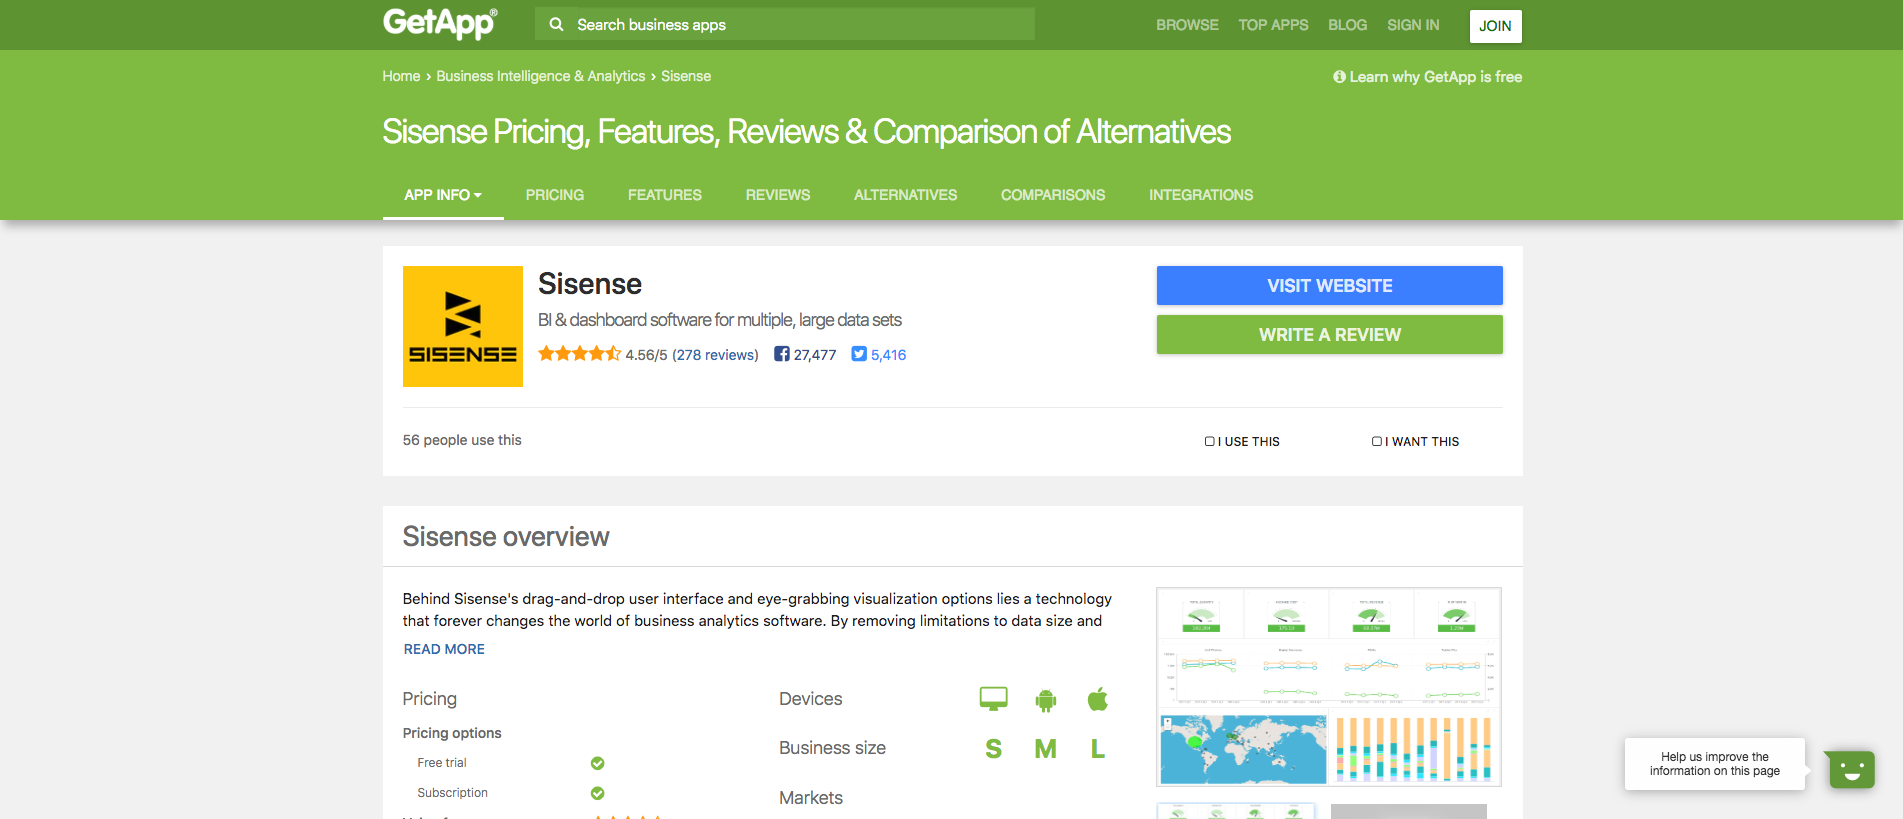 Screenshot of the GetApp interface showcasing the Sisense review page.